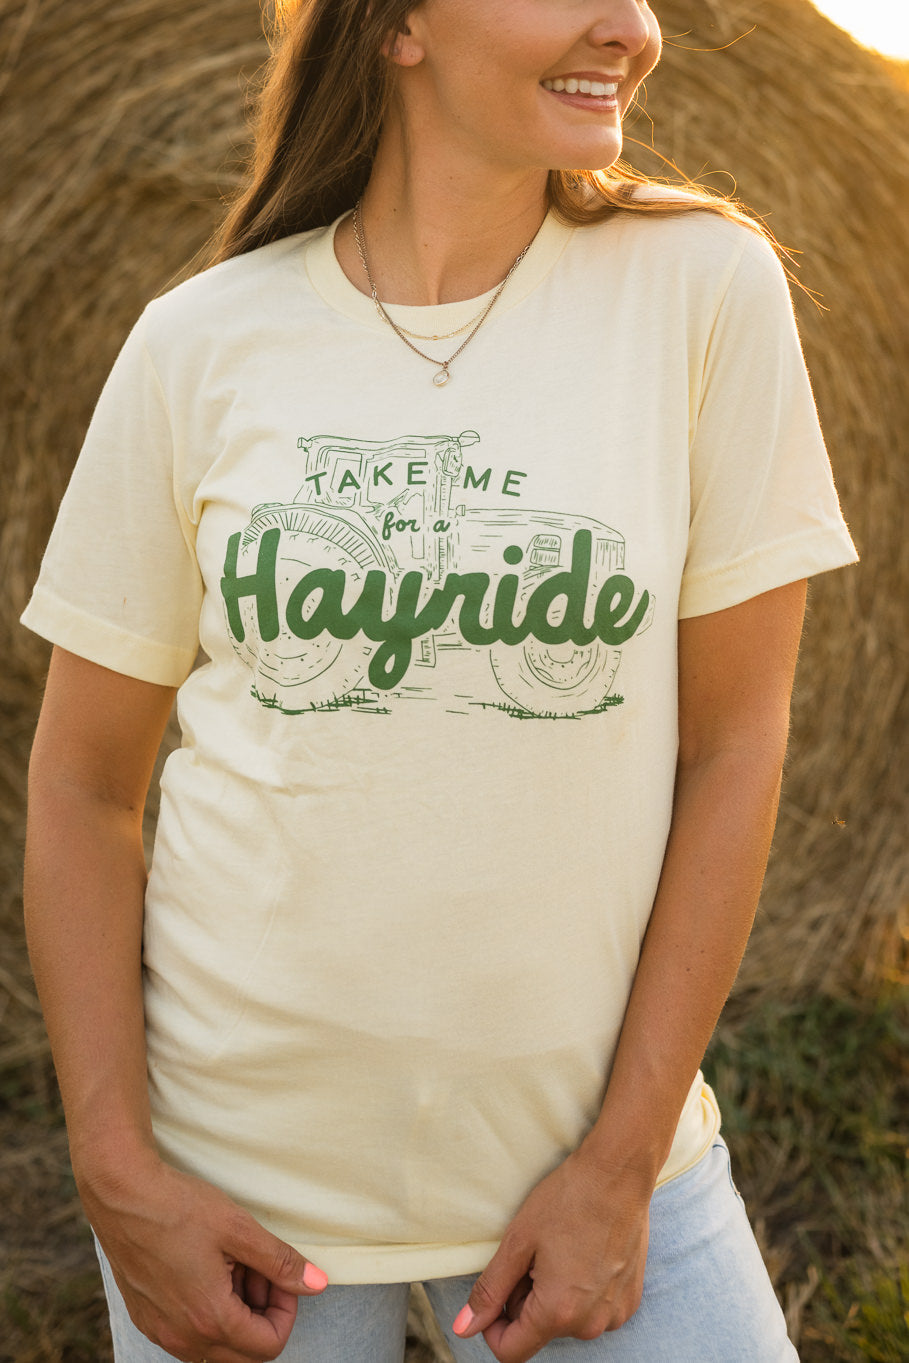 Take Me For A Hayride Graphic Tee (Adult, Toddler, Youth) - Rosebud's Tees